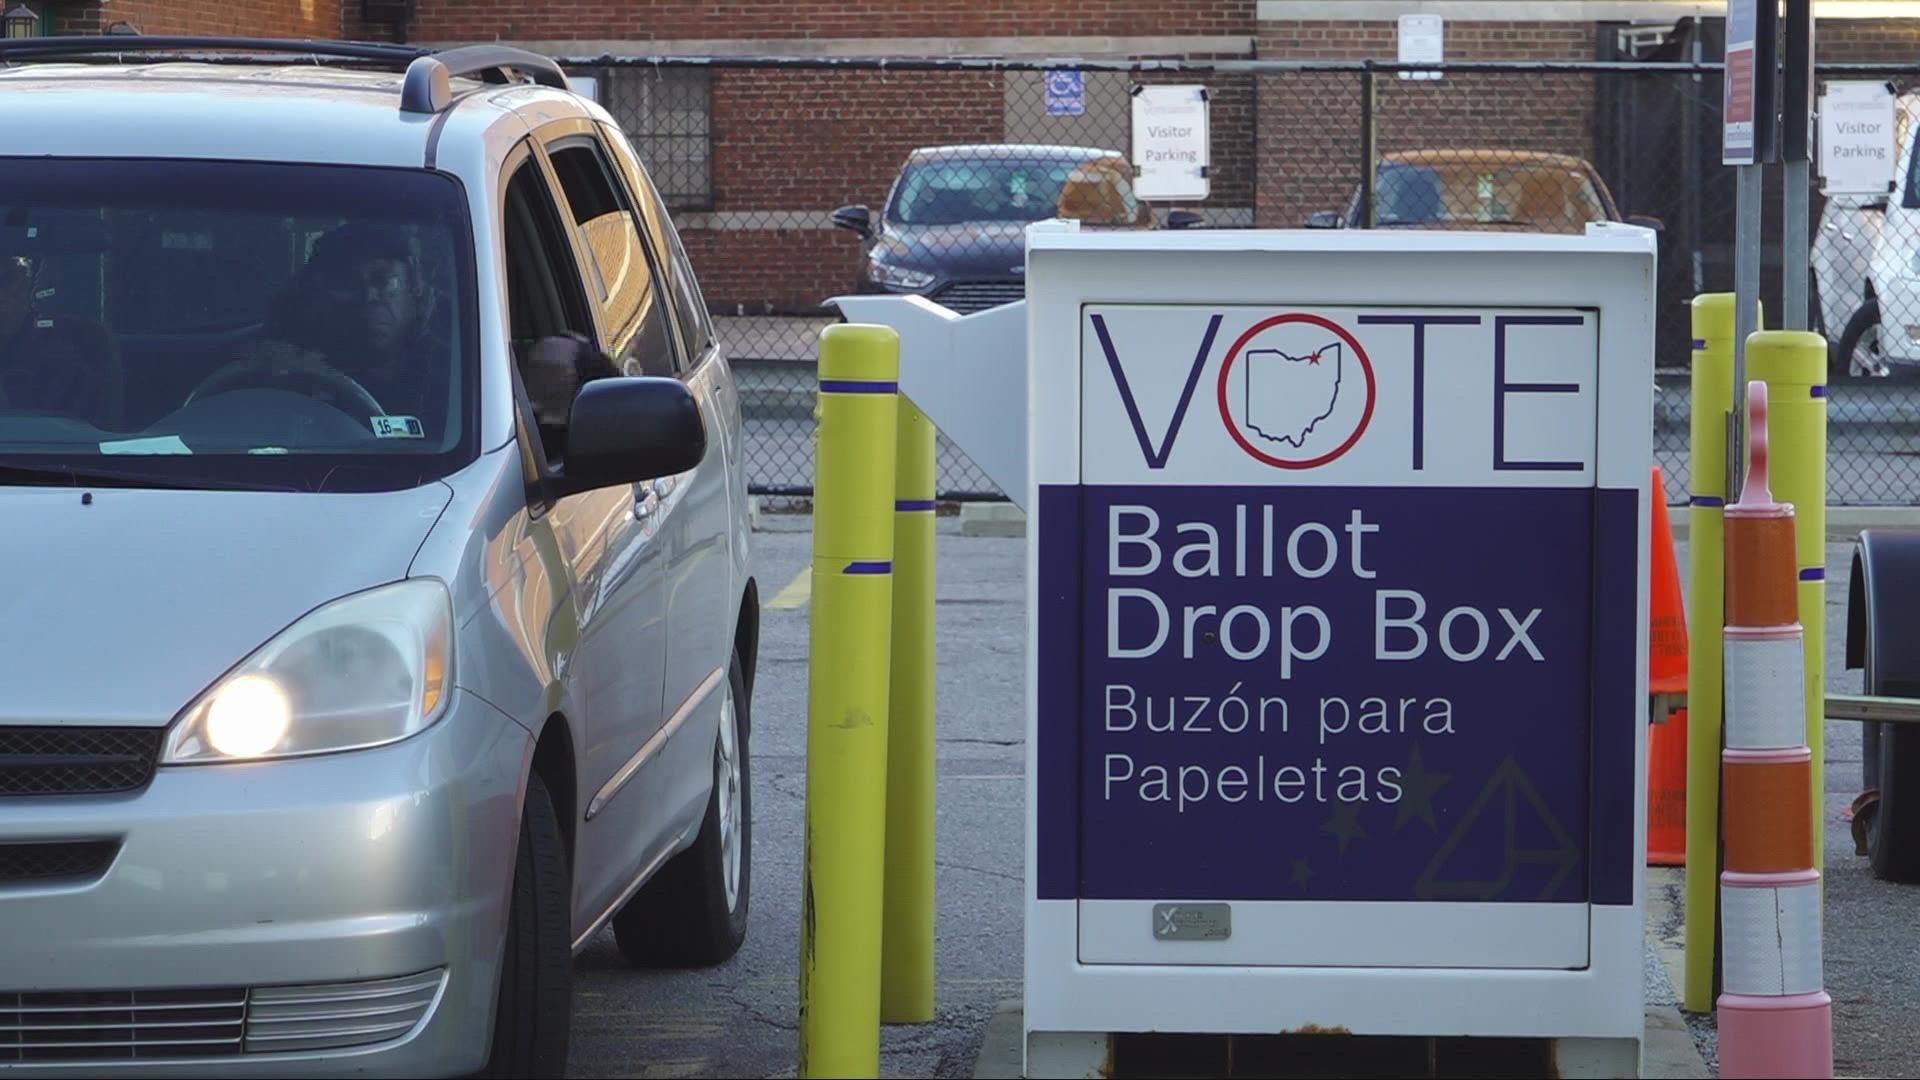 3News spoke to Mike West with the Cuyahoga County Board of Elections to clear the air on five common voting rumors ahead of Tuesday's elections.